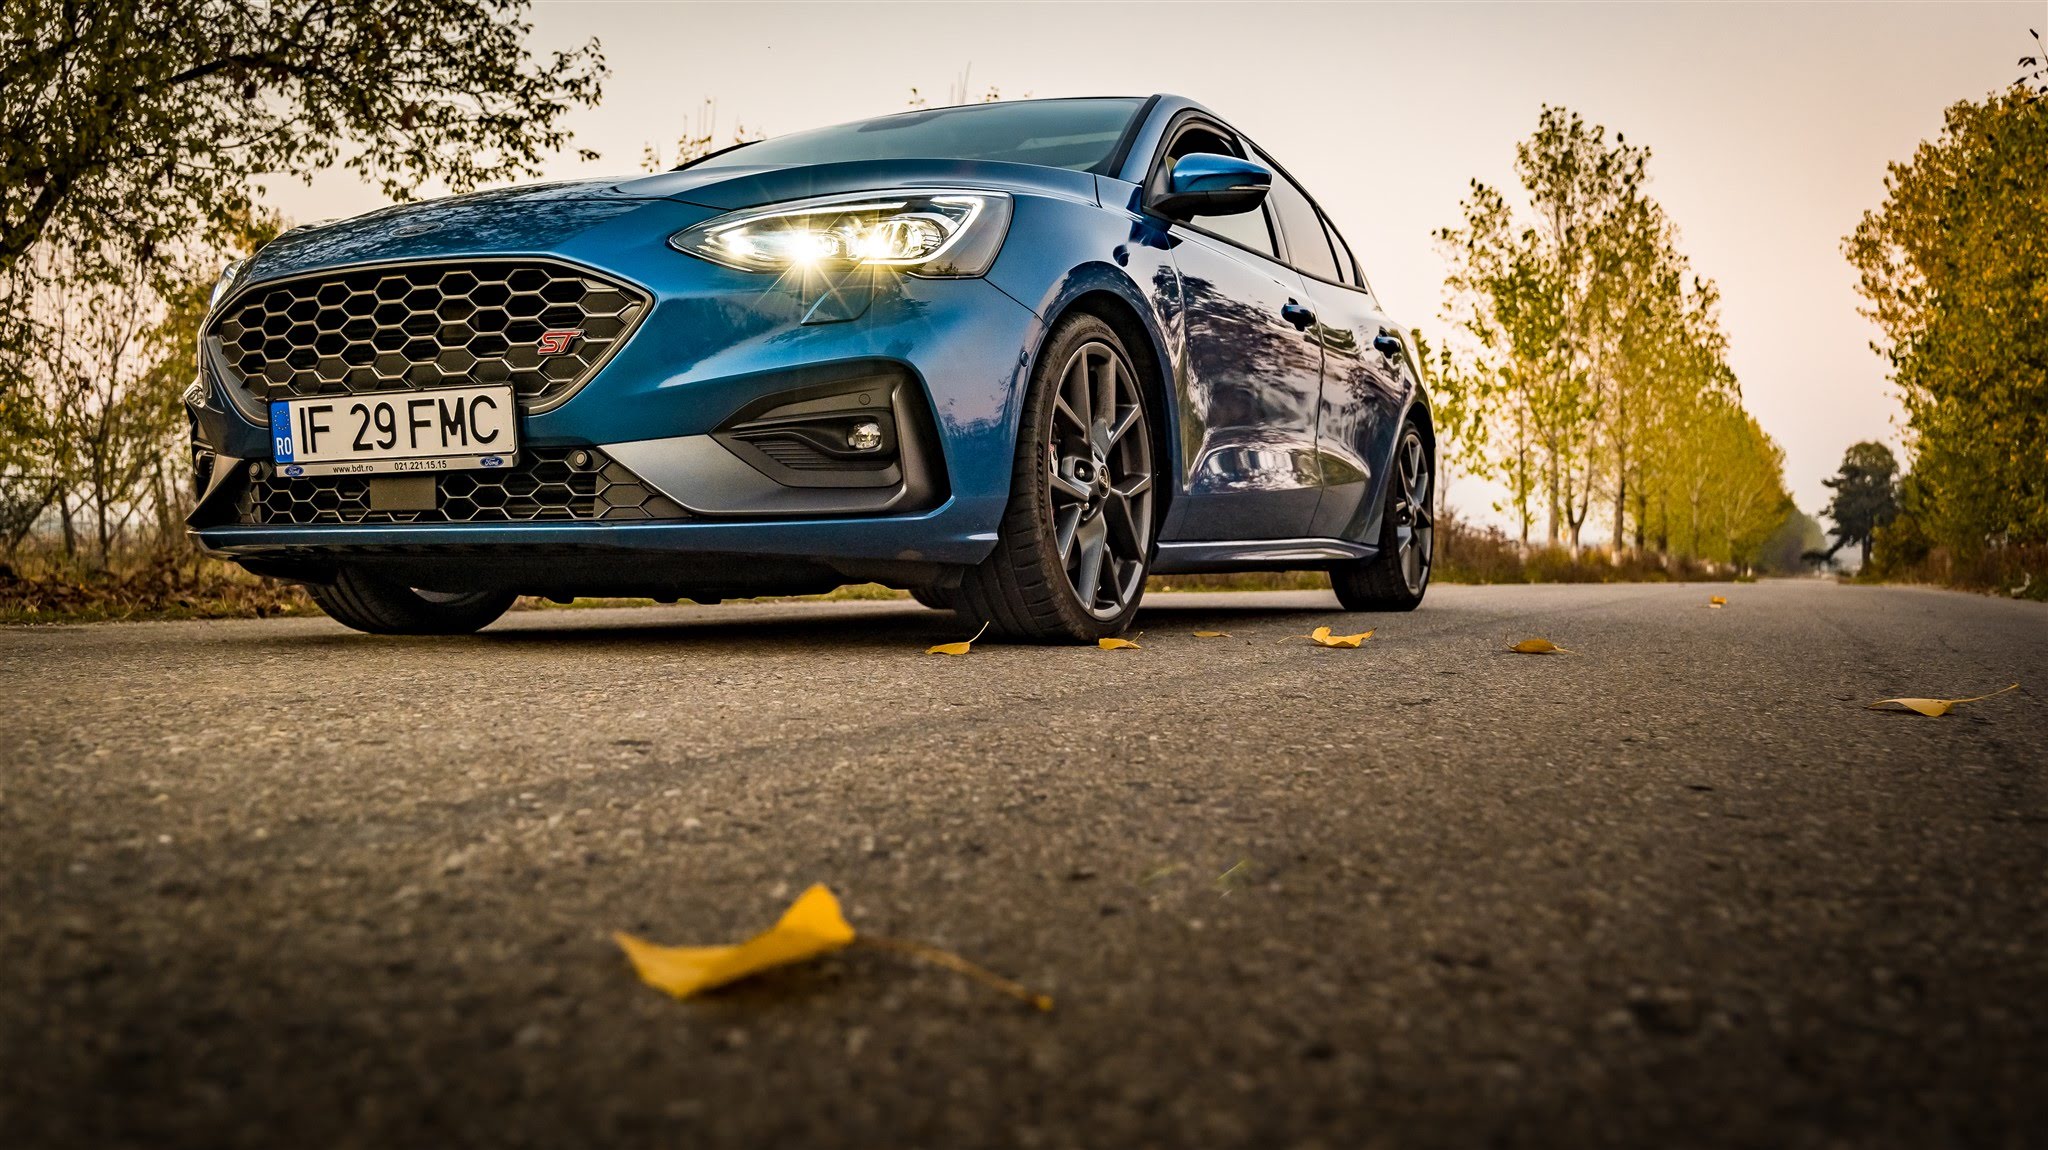 https://www.gadget.ro/wp-content/uploads/2019/12/Ford-Focus-ST-2019-2.3-EcoBoost-280-CP-M6-22.jpg